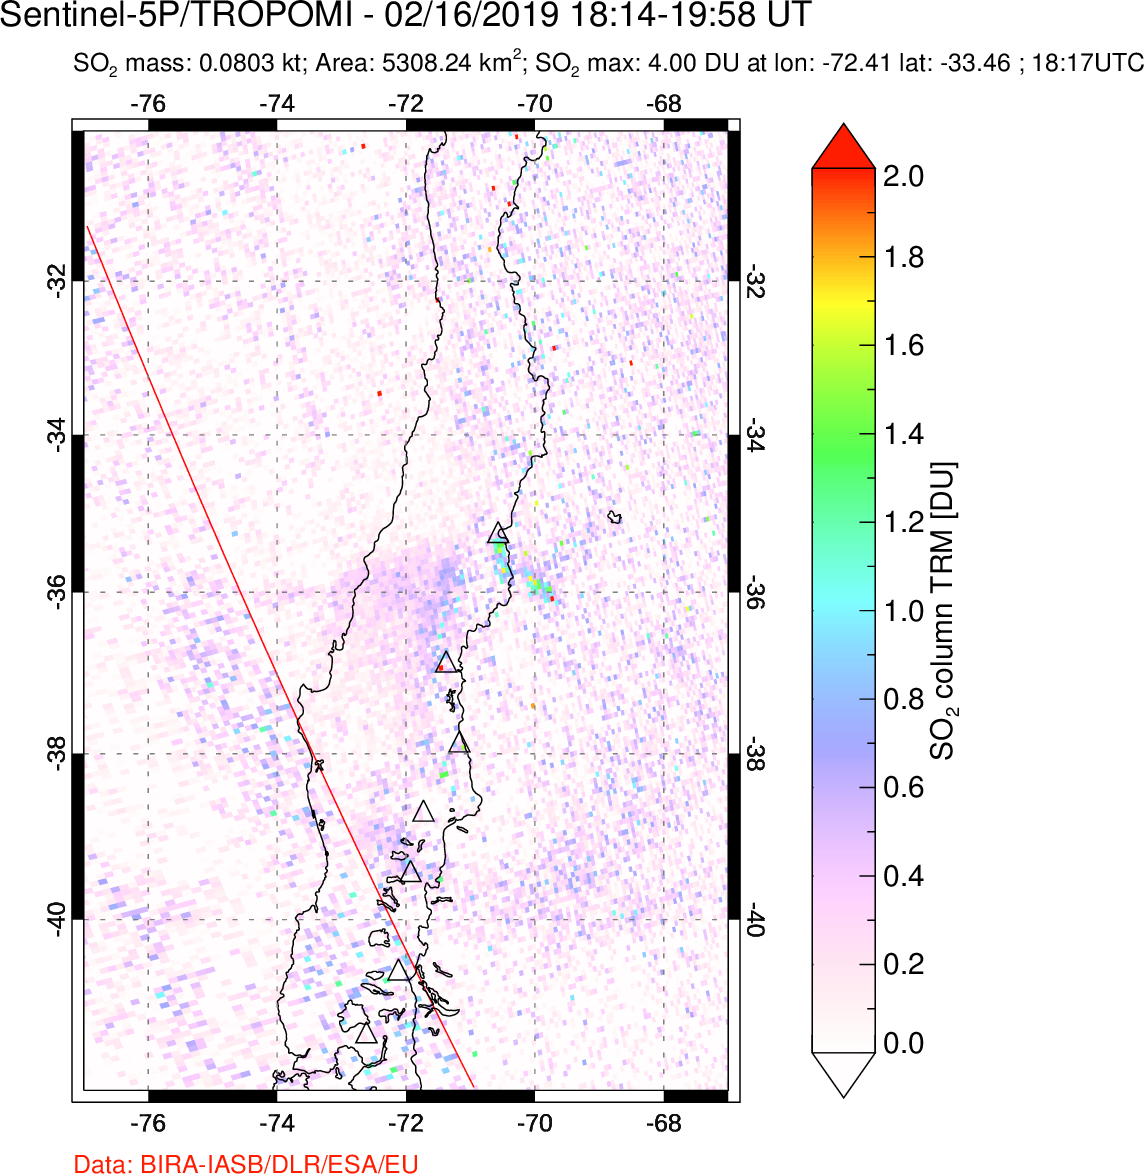 A sulfur dioxide image over Central Chile on Feb 16, 2019.